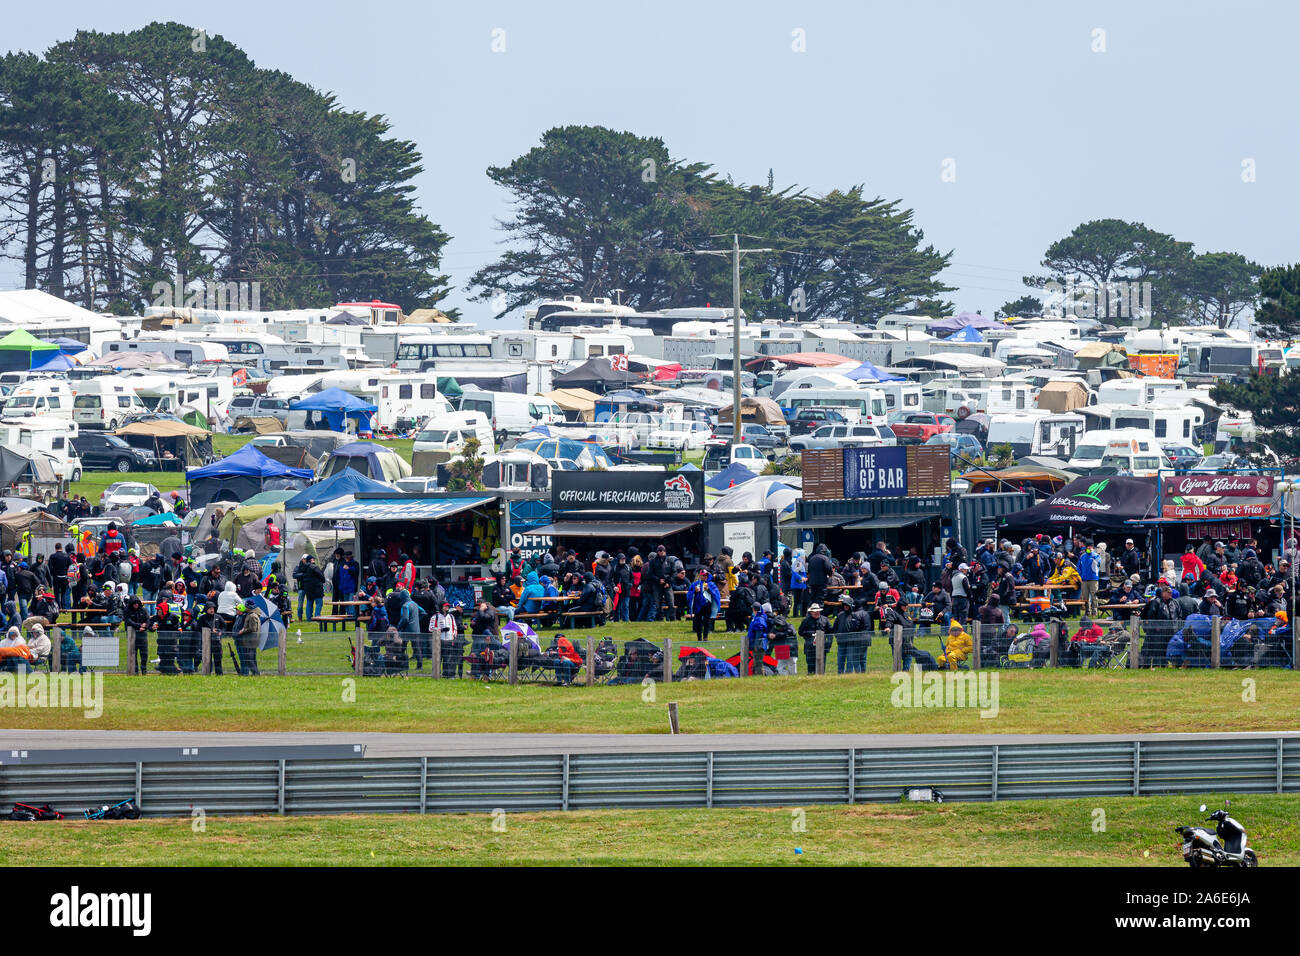 Phillip Island, Australia. 26 October, 2019. ONe of the camping grounds  during Free Practice 4 at the Promac Generac Australian MotoGP. Credit:  Dave Hewison/Alamy Live News Stock Photo - Alamy